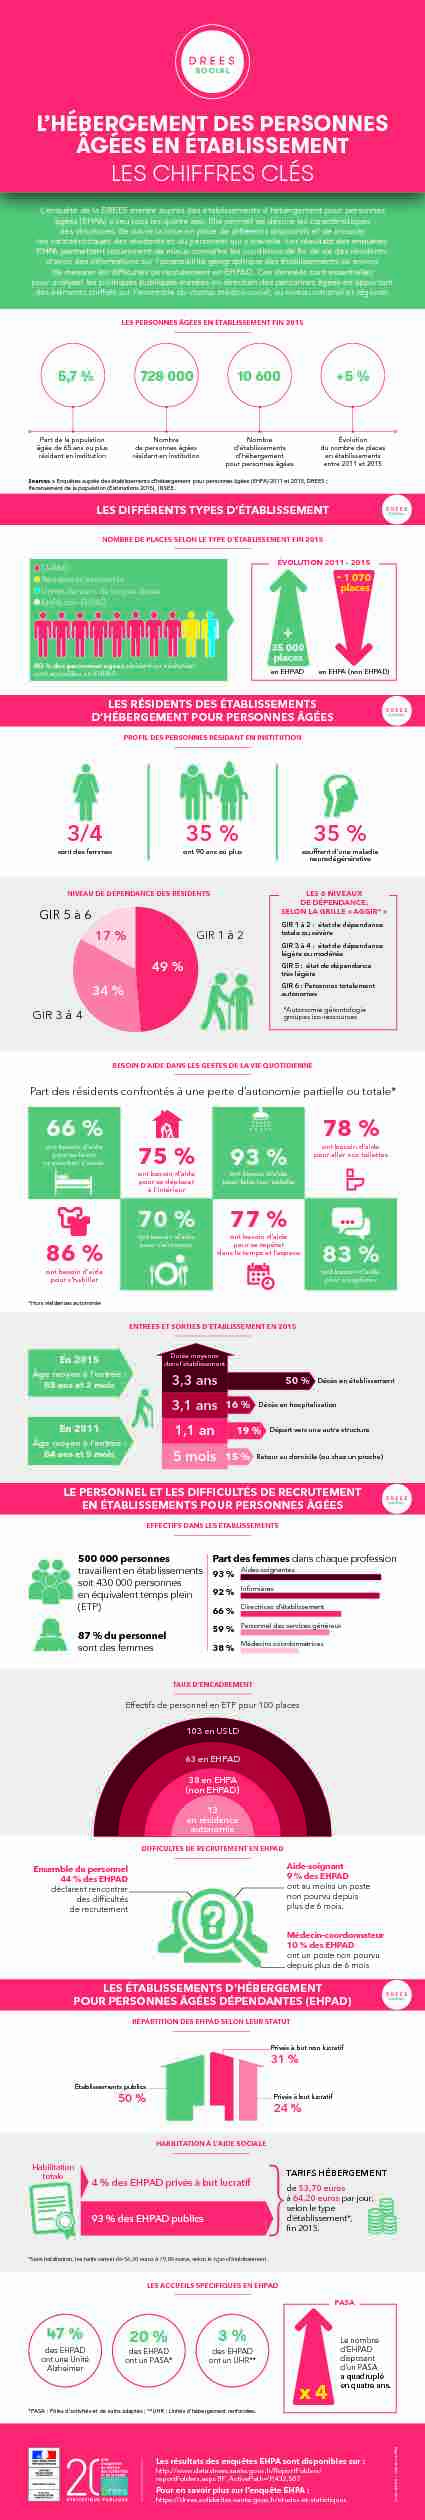 Infographie EHPA 08.indd